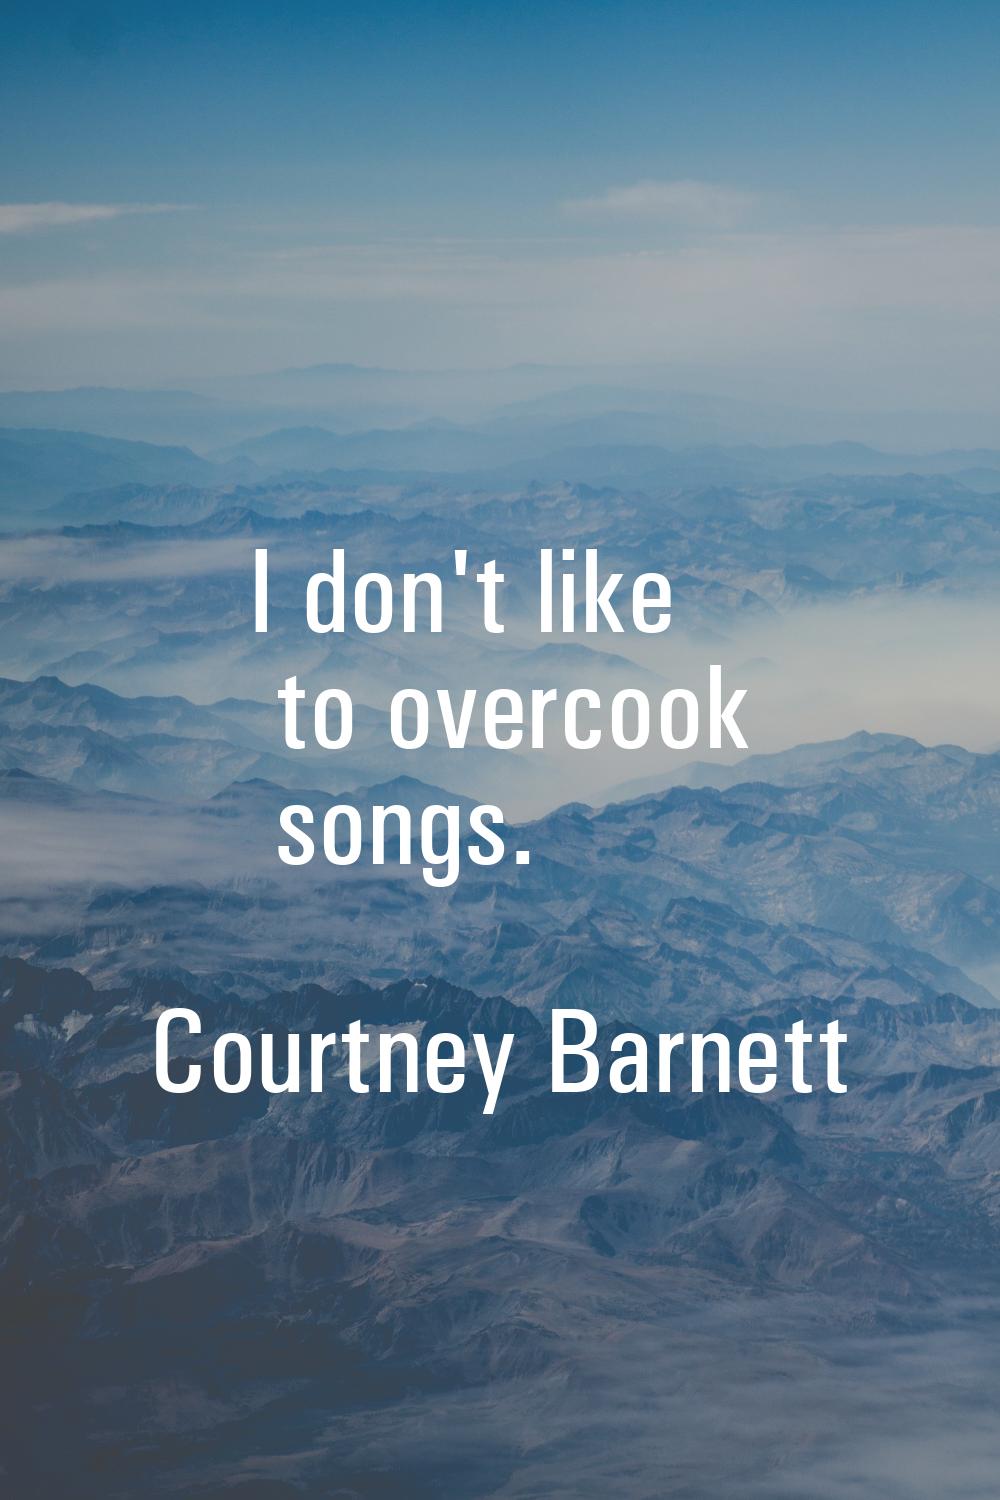 I don't like to overcook songs.